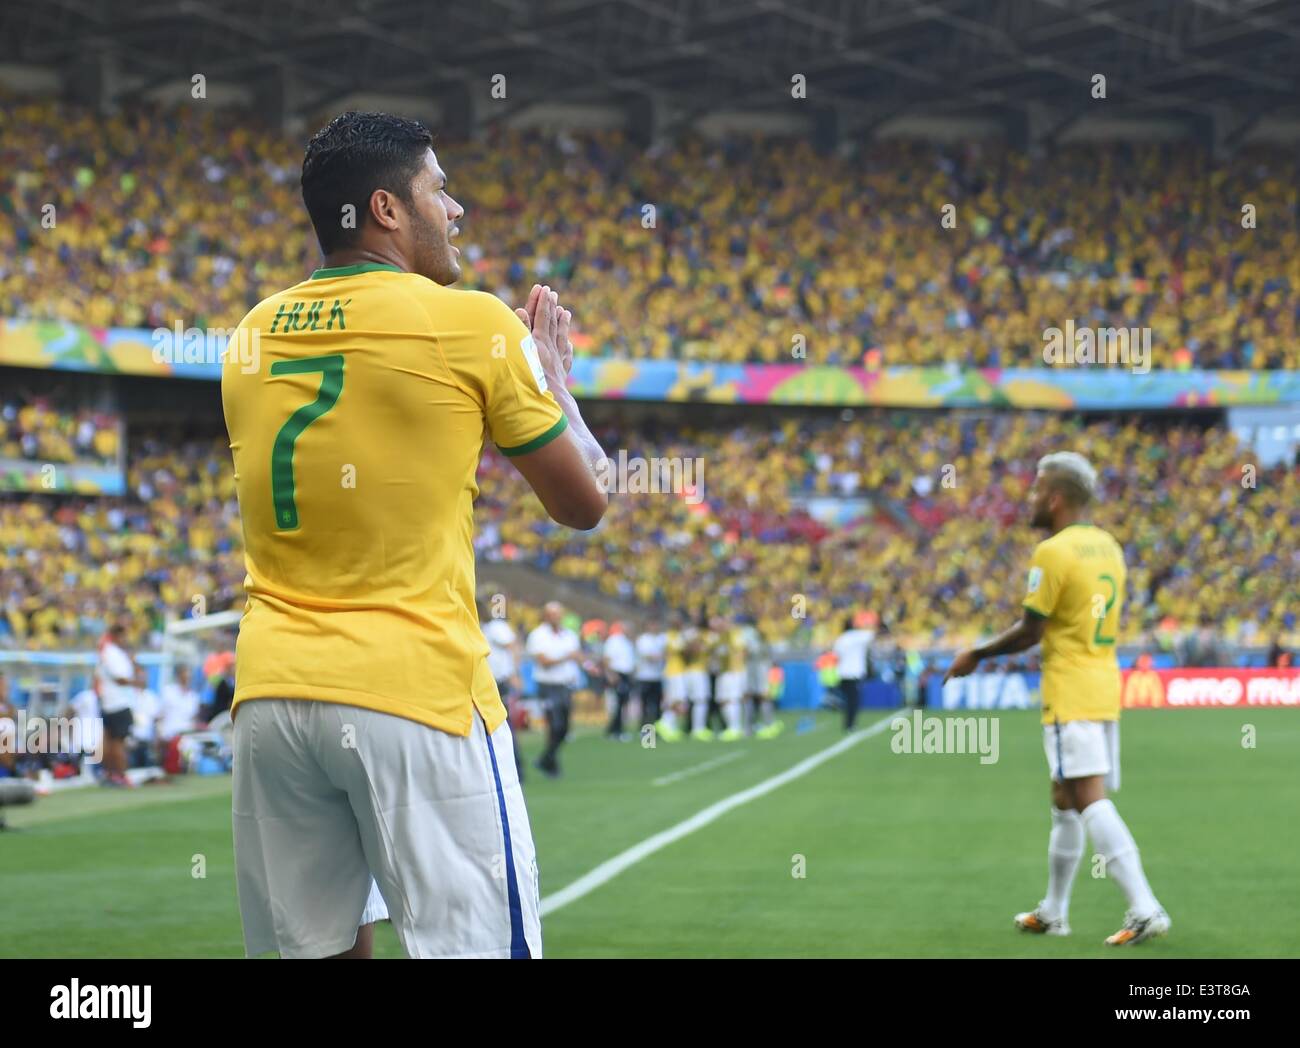 Belo Horizonte, Brazil. 28th June, 2014. Brazil's Hulk reacts after his goal being nullified during a Round of 16 match between Brazil and Chile of 2014 FIFA World Cup at the Estadio Mineirao Stadium in Belo Horizonte, Brazil, on June 28, 2014. Credit:  Liu Dawei/Xinhua/Alamy Live News Stock Photo